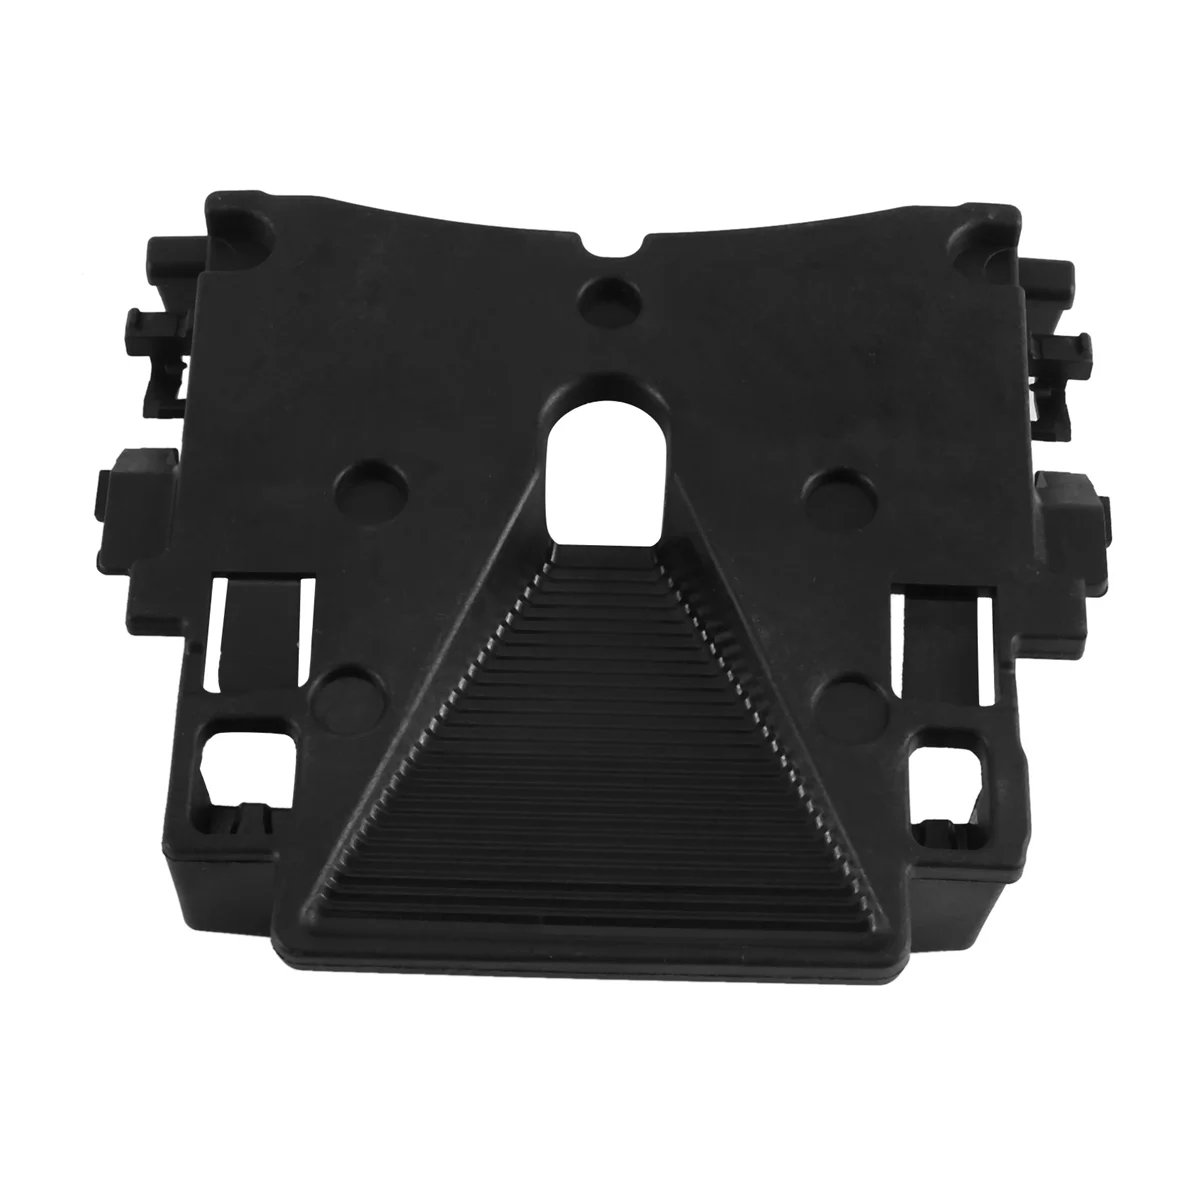 

Car Fourth Generation Keeping Camera Cover Plate and Bracket, No Need to Change Glass for